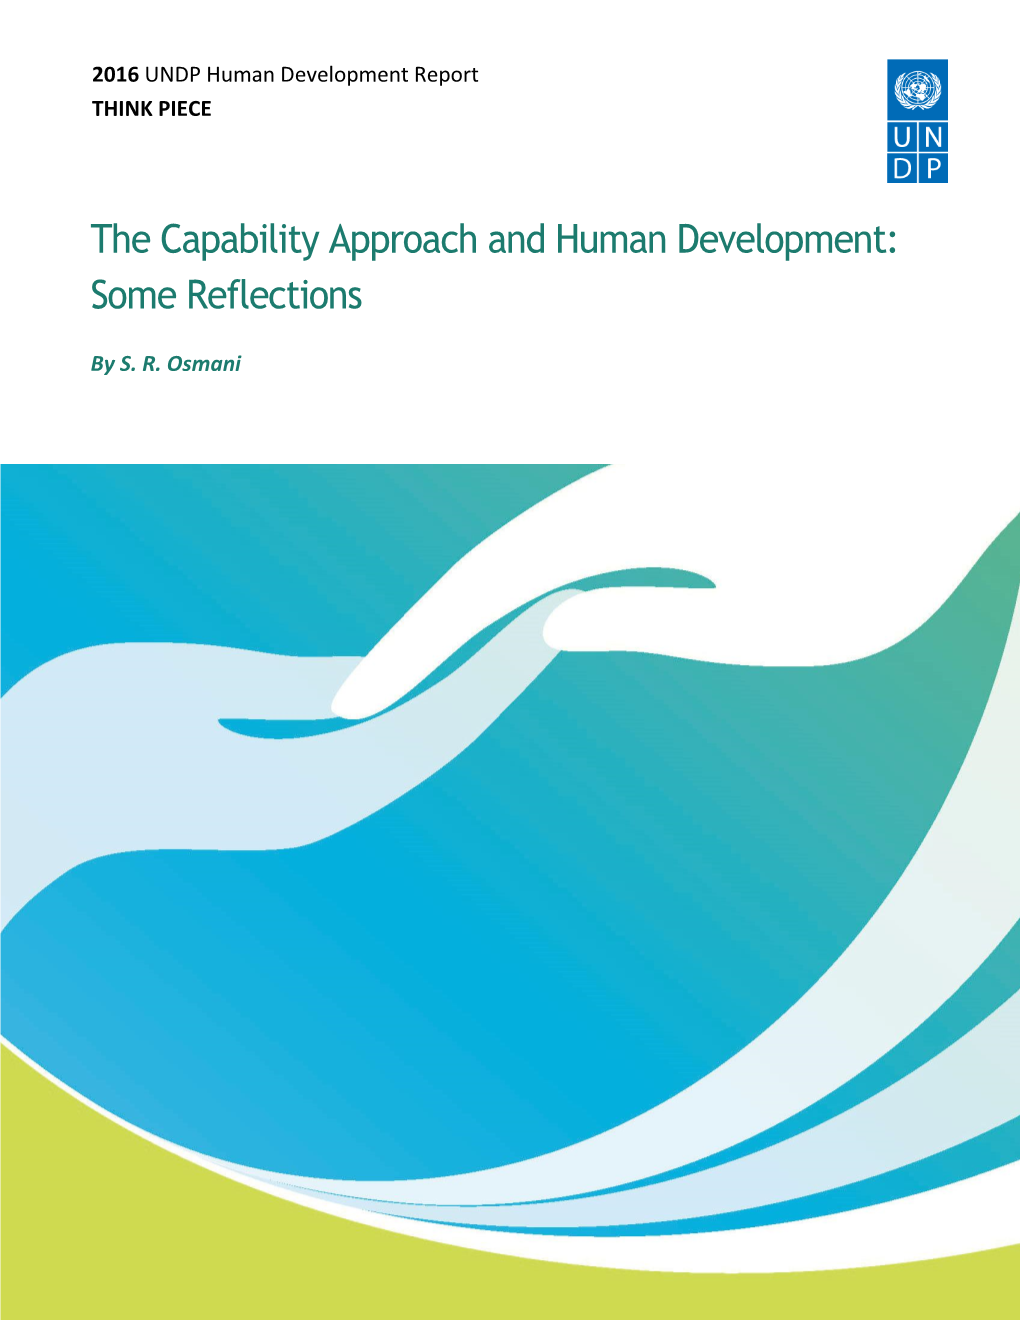 The Capability Approach and Human Development: Some Reflections